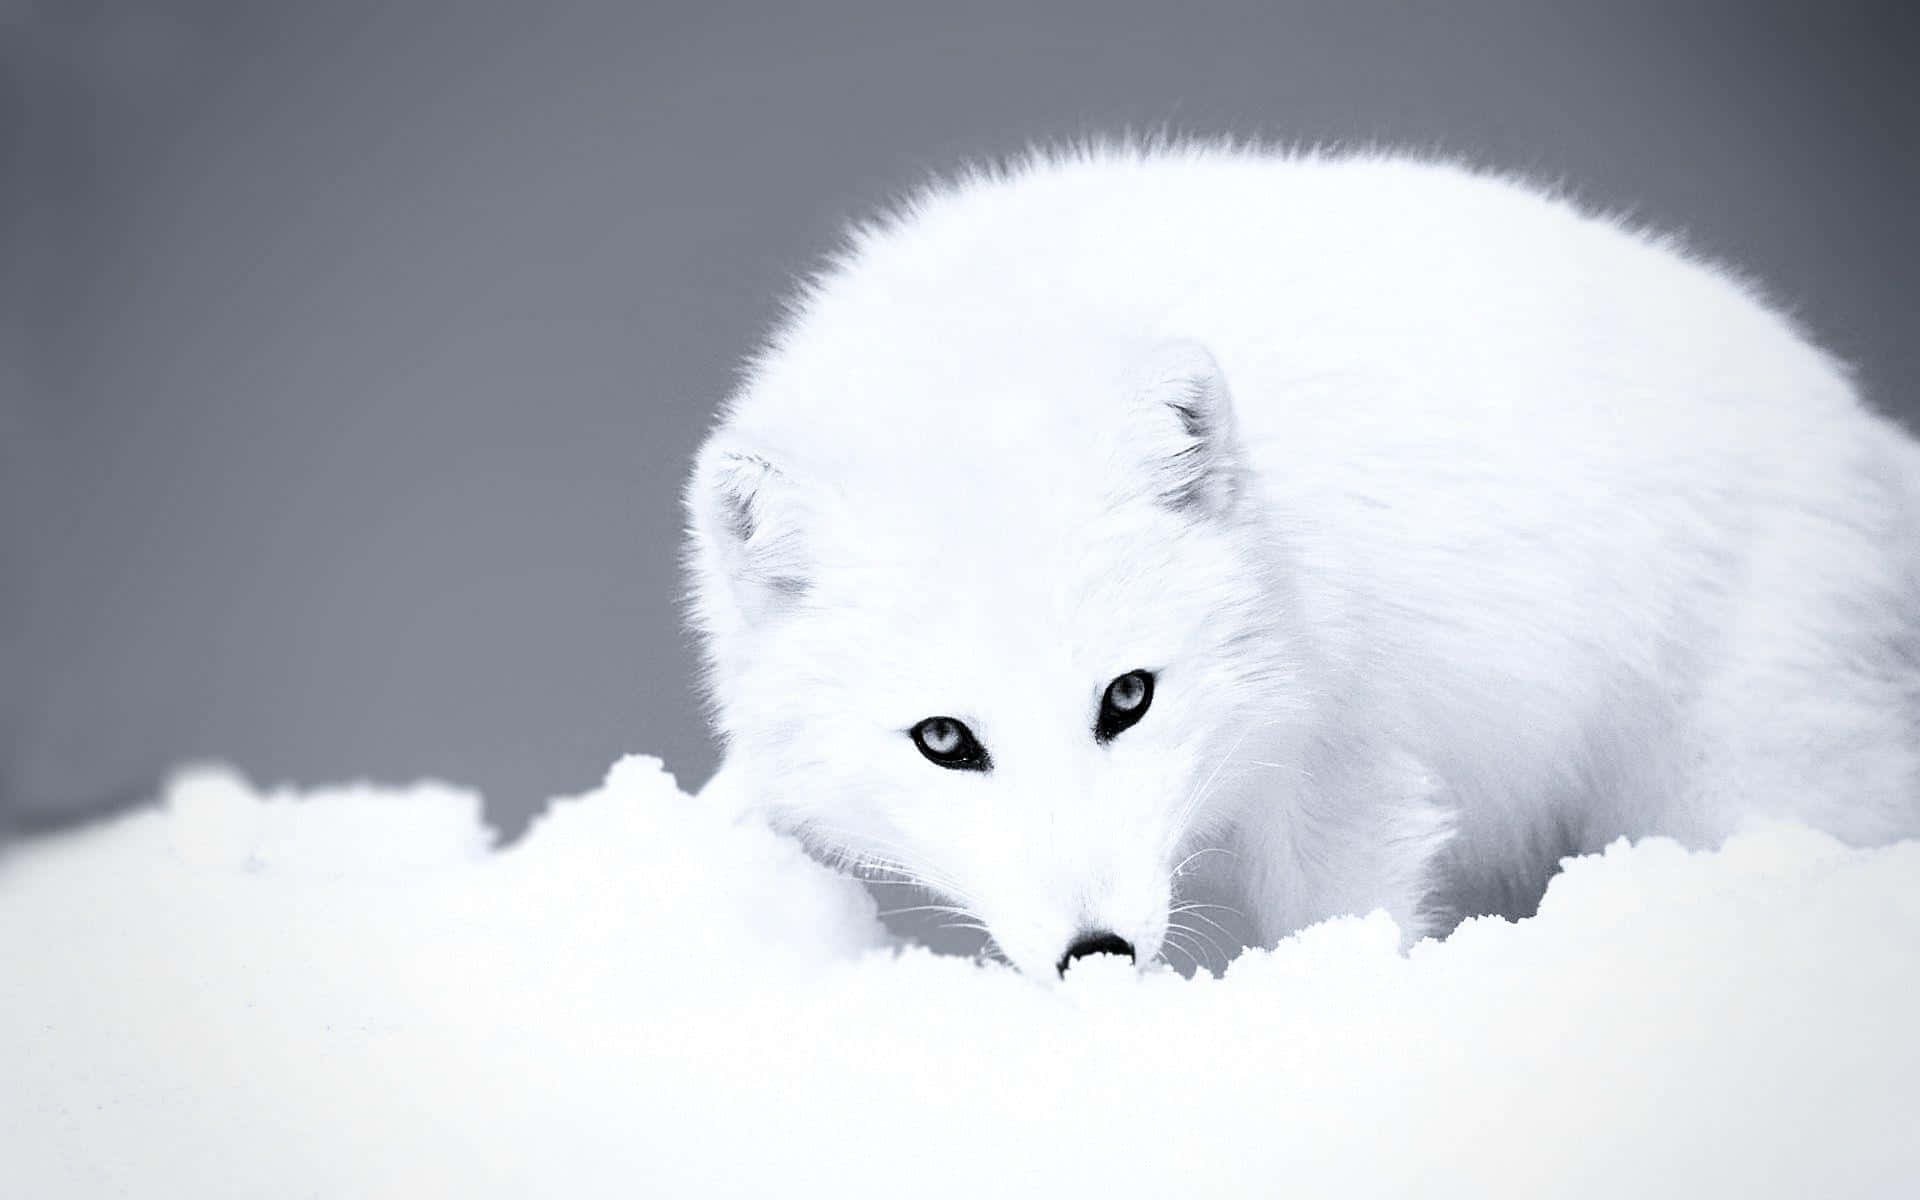 A beautiful and mysterious Arctic Fox peers slyly into the distance